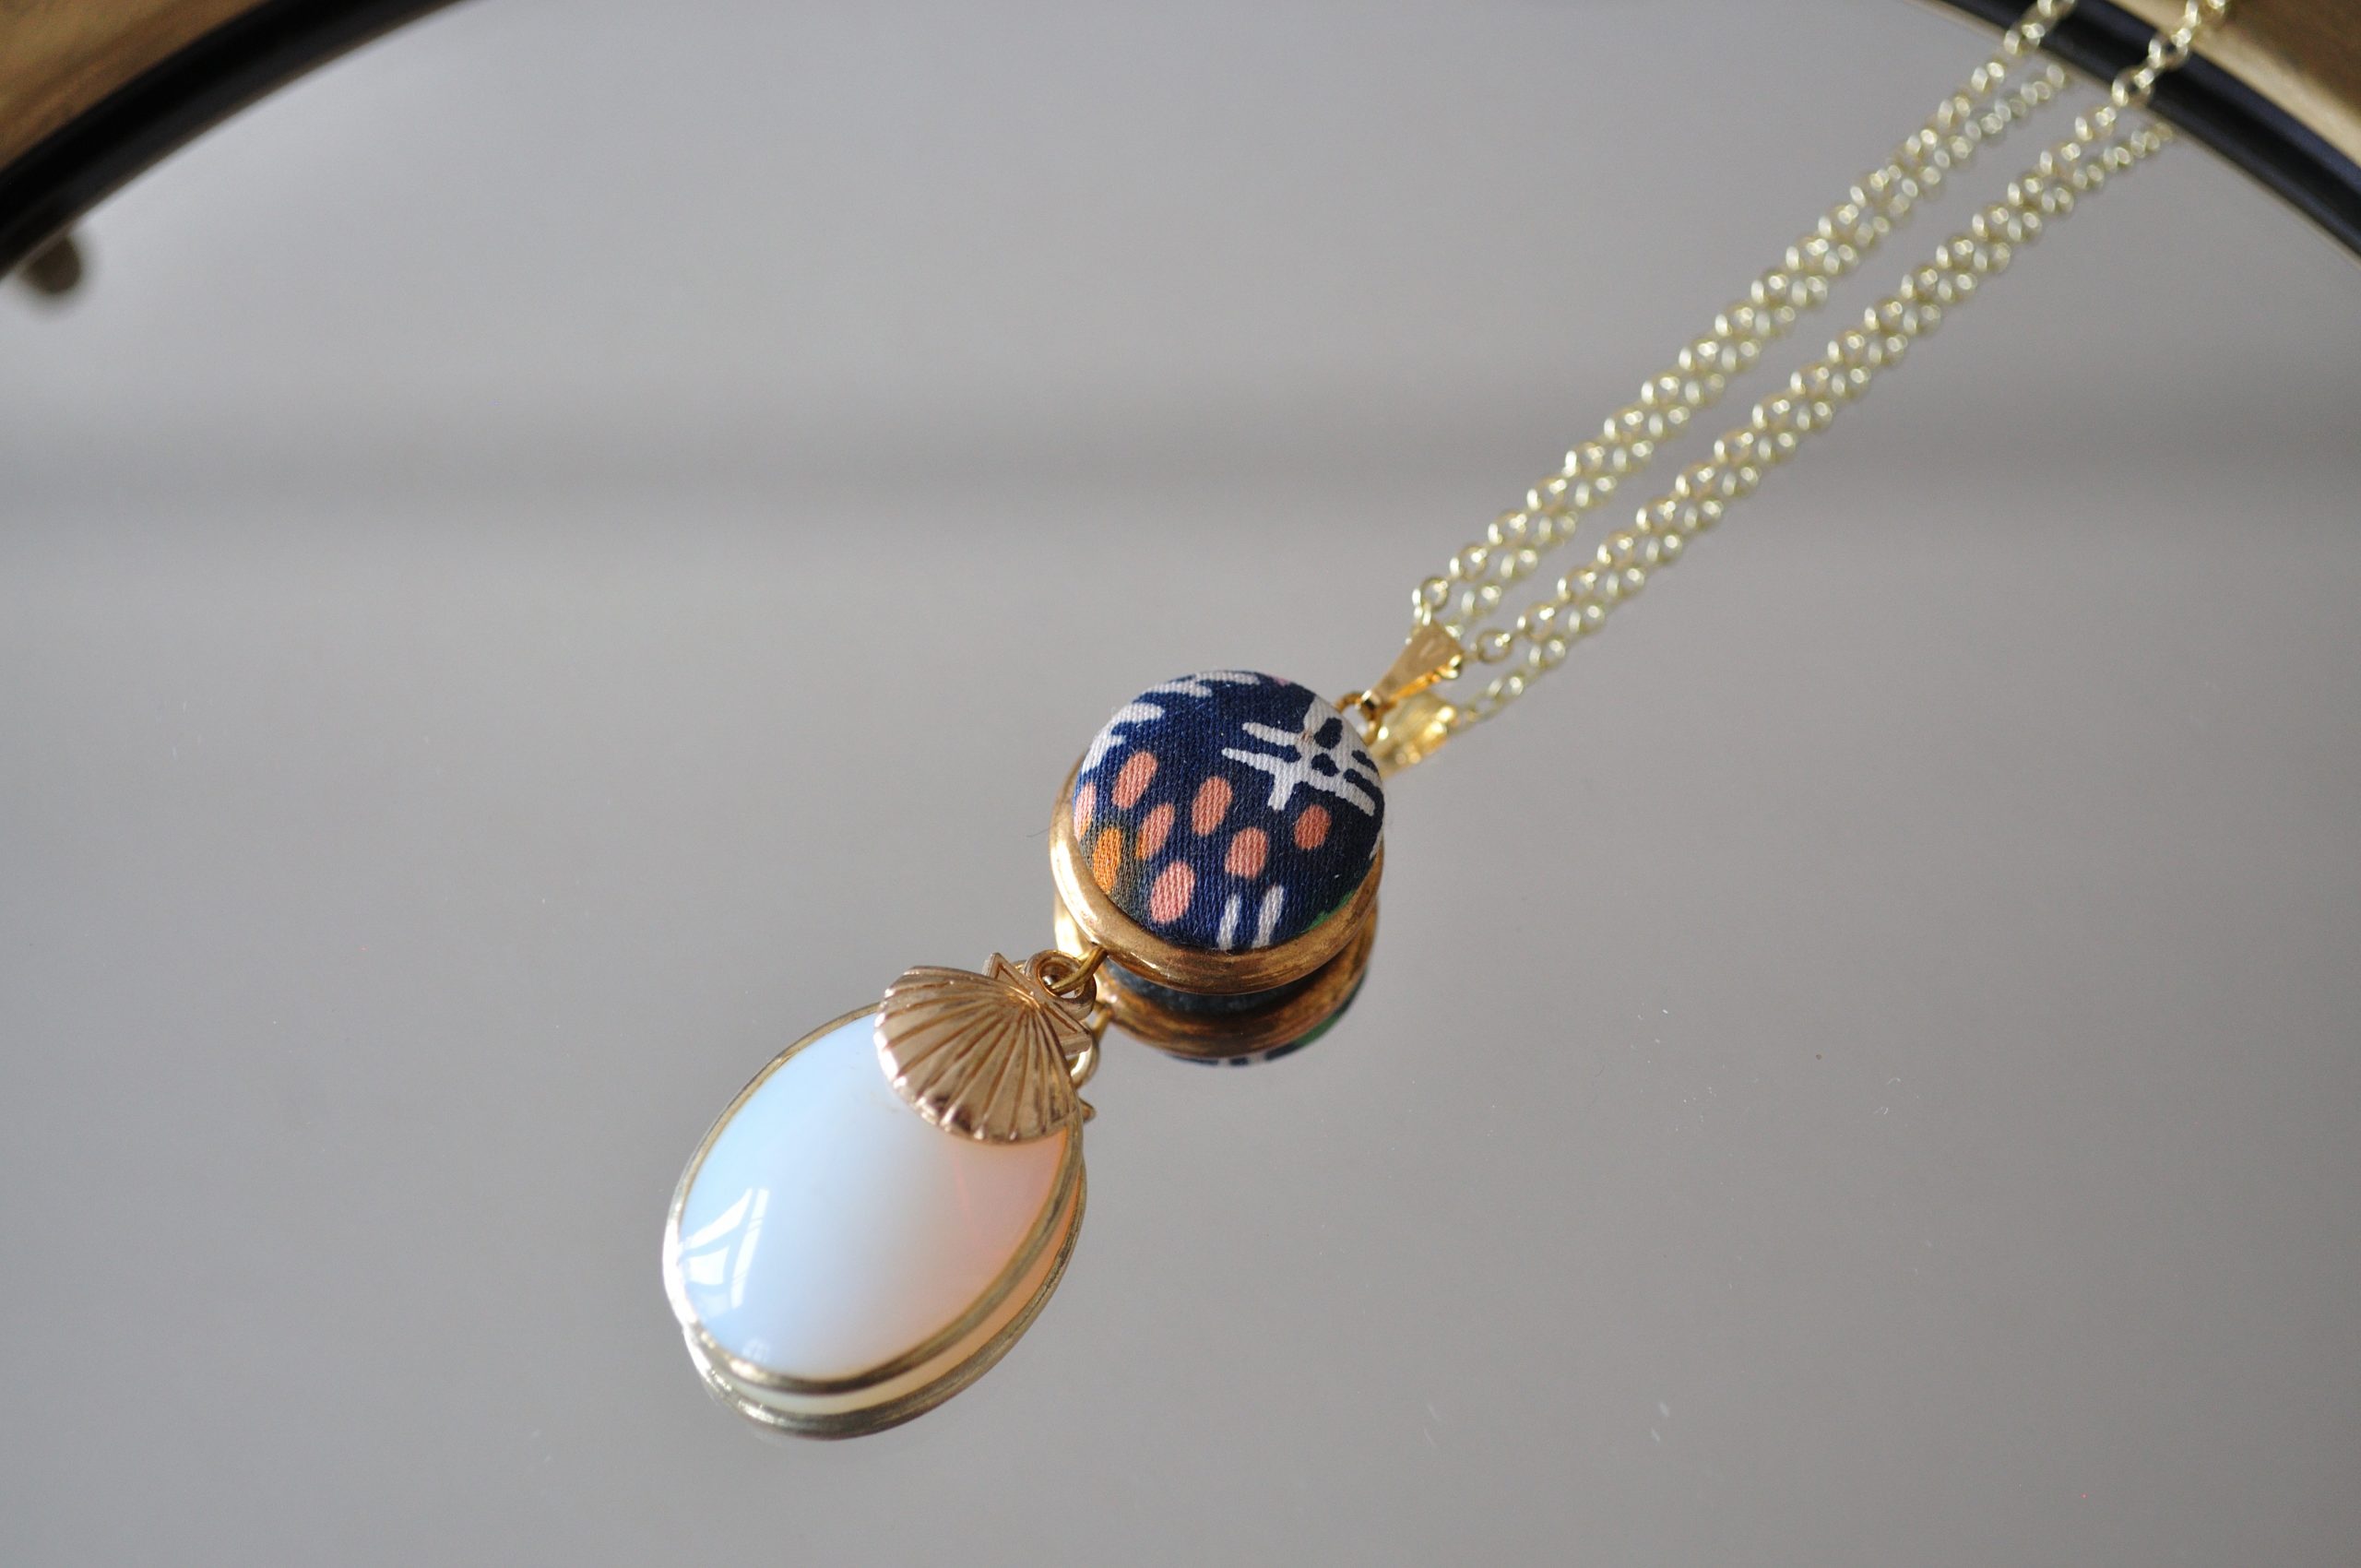 Asian-inspired, find gold-plated necklace art deco style with Opalite cabochon pendant and stylised shell pendant